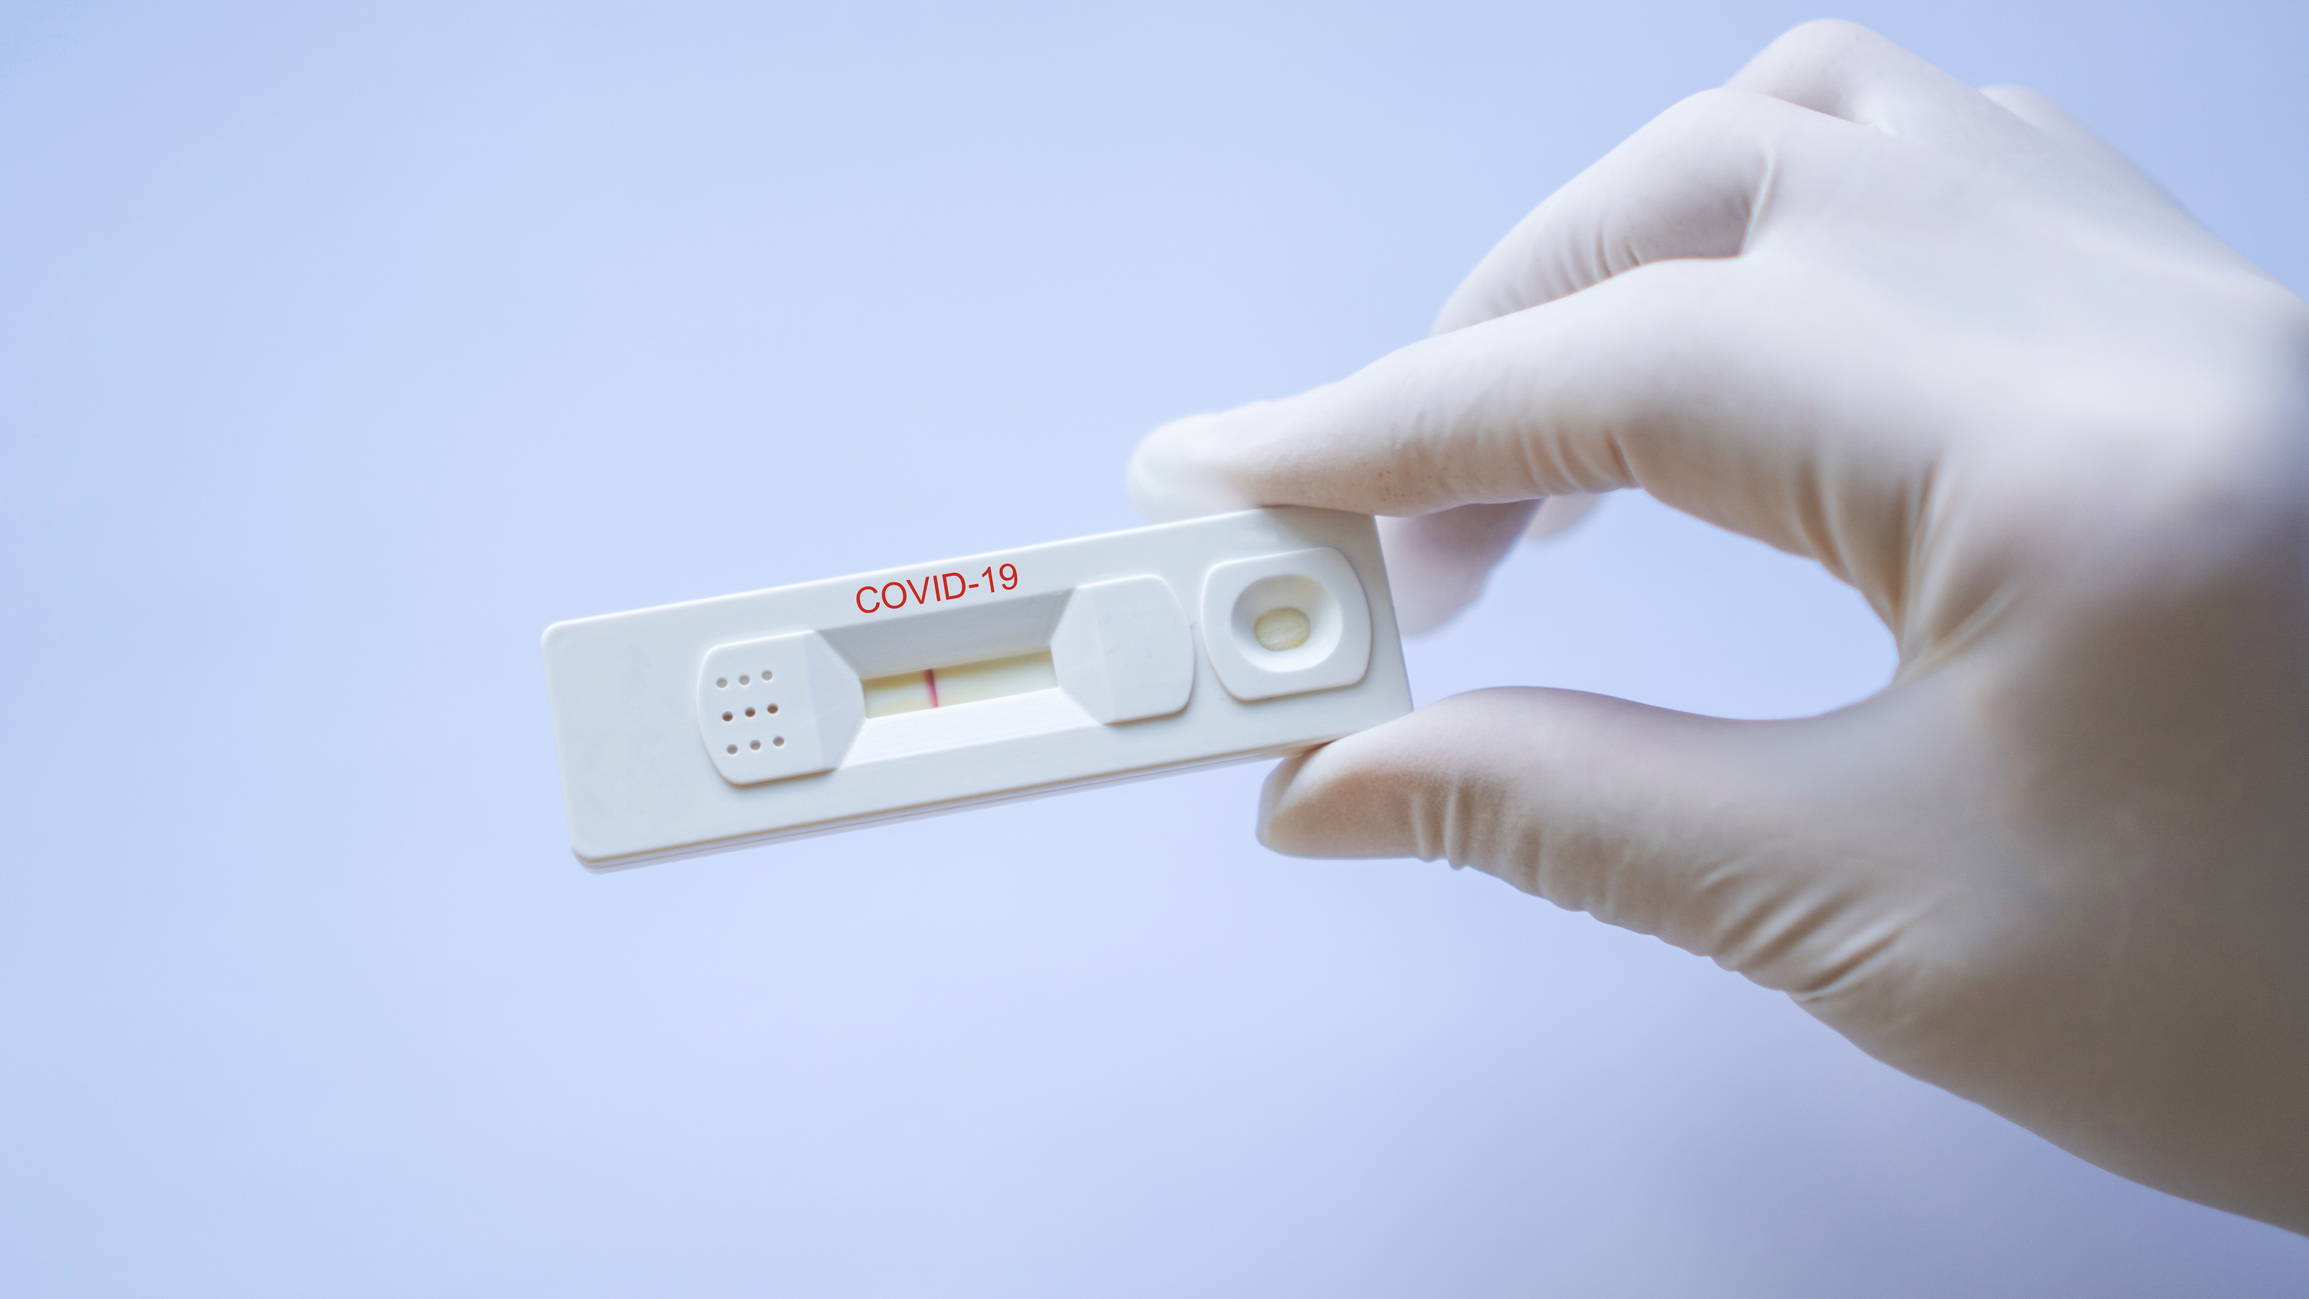 A negative test result in a rapid test device for COVID-19.